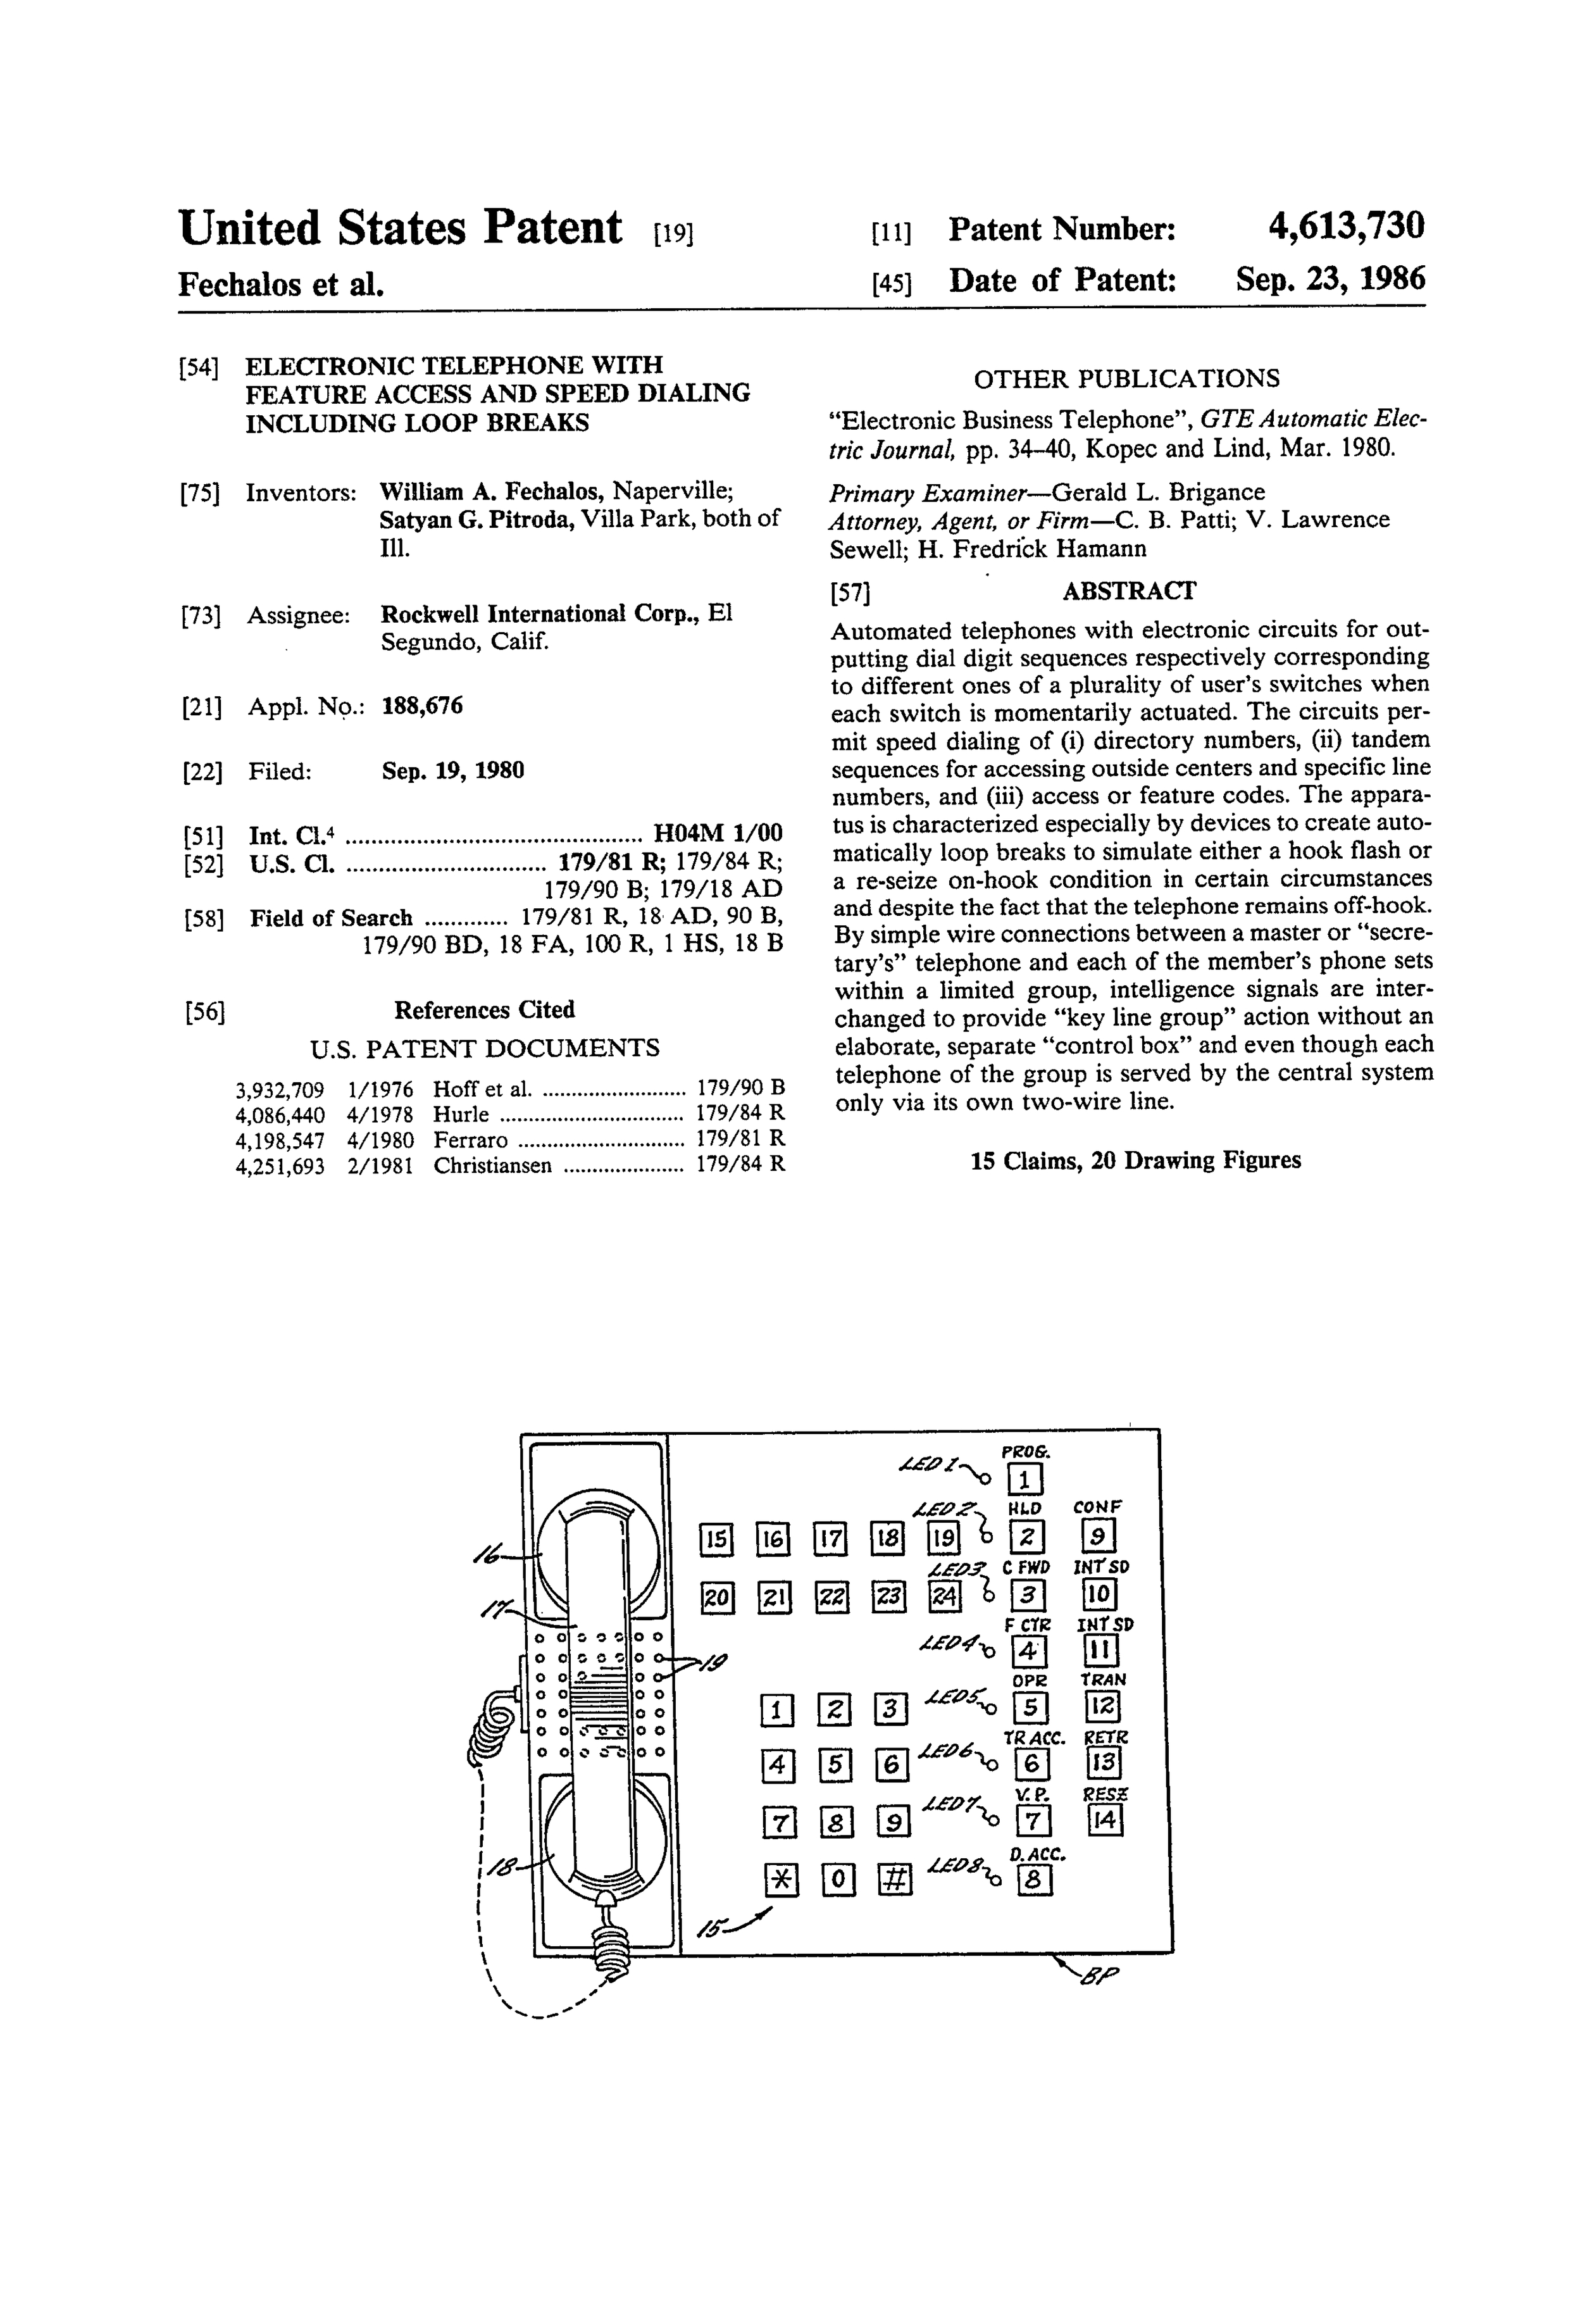 US4613730 Electronic telephone with feature access and speed dialing including loop breaks.jpg